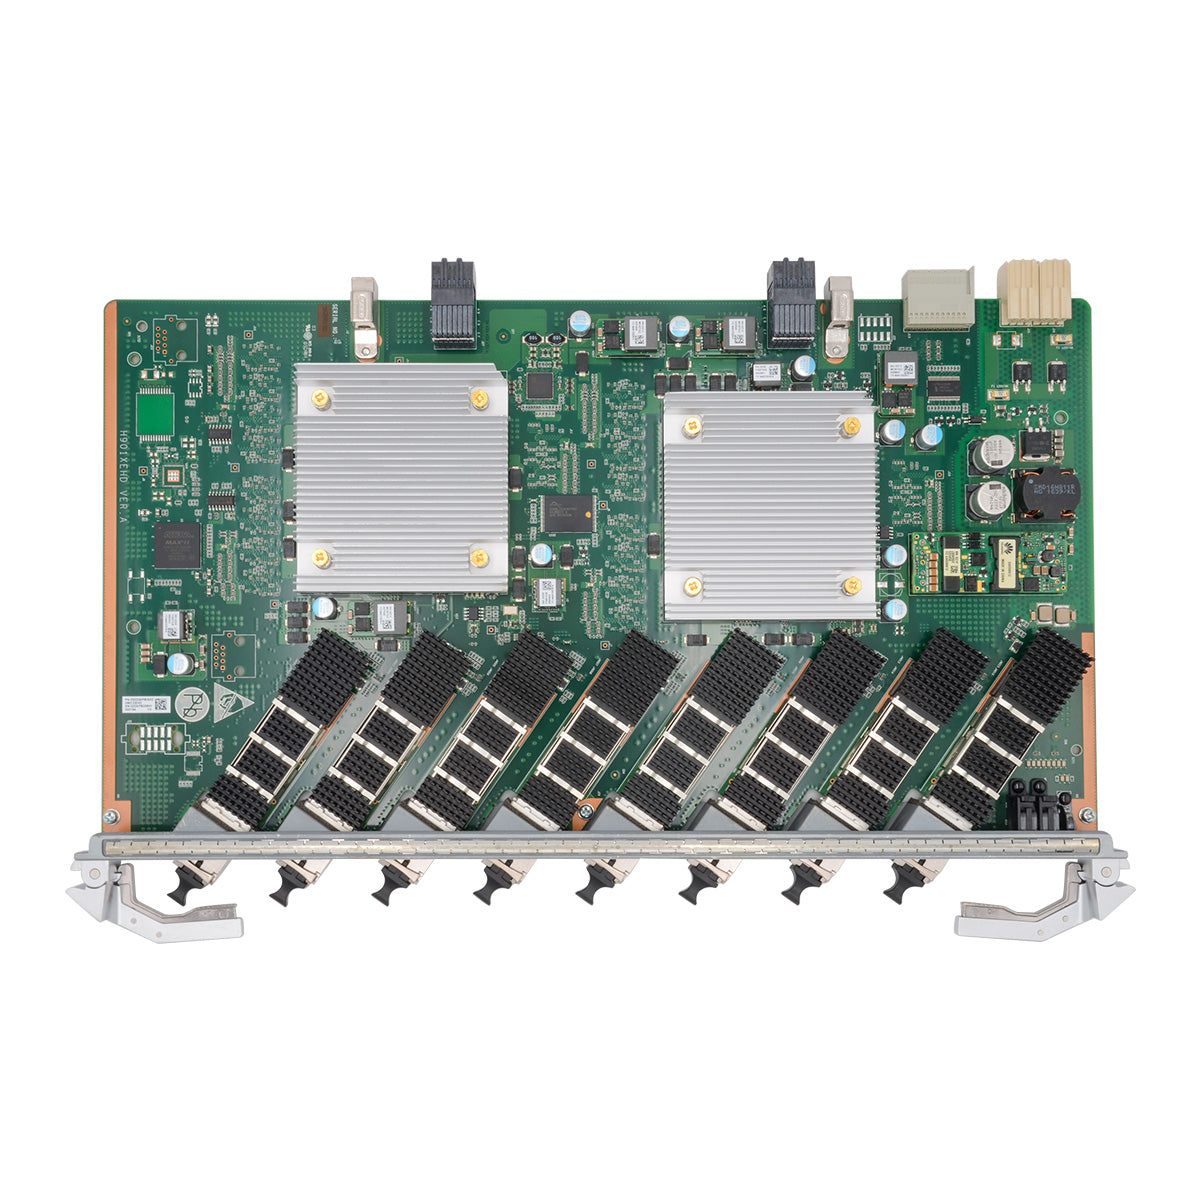 Huawei H901XEHD 8-port 10G-EPON Board for MA5800 series OLT